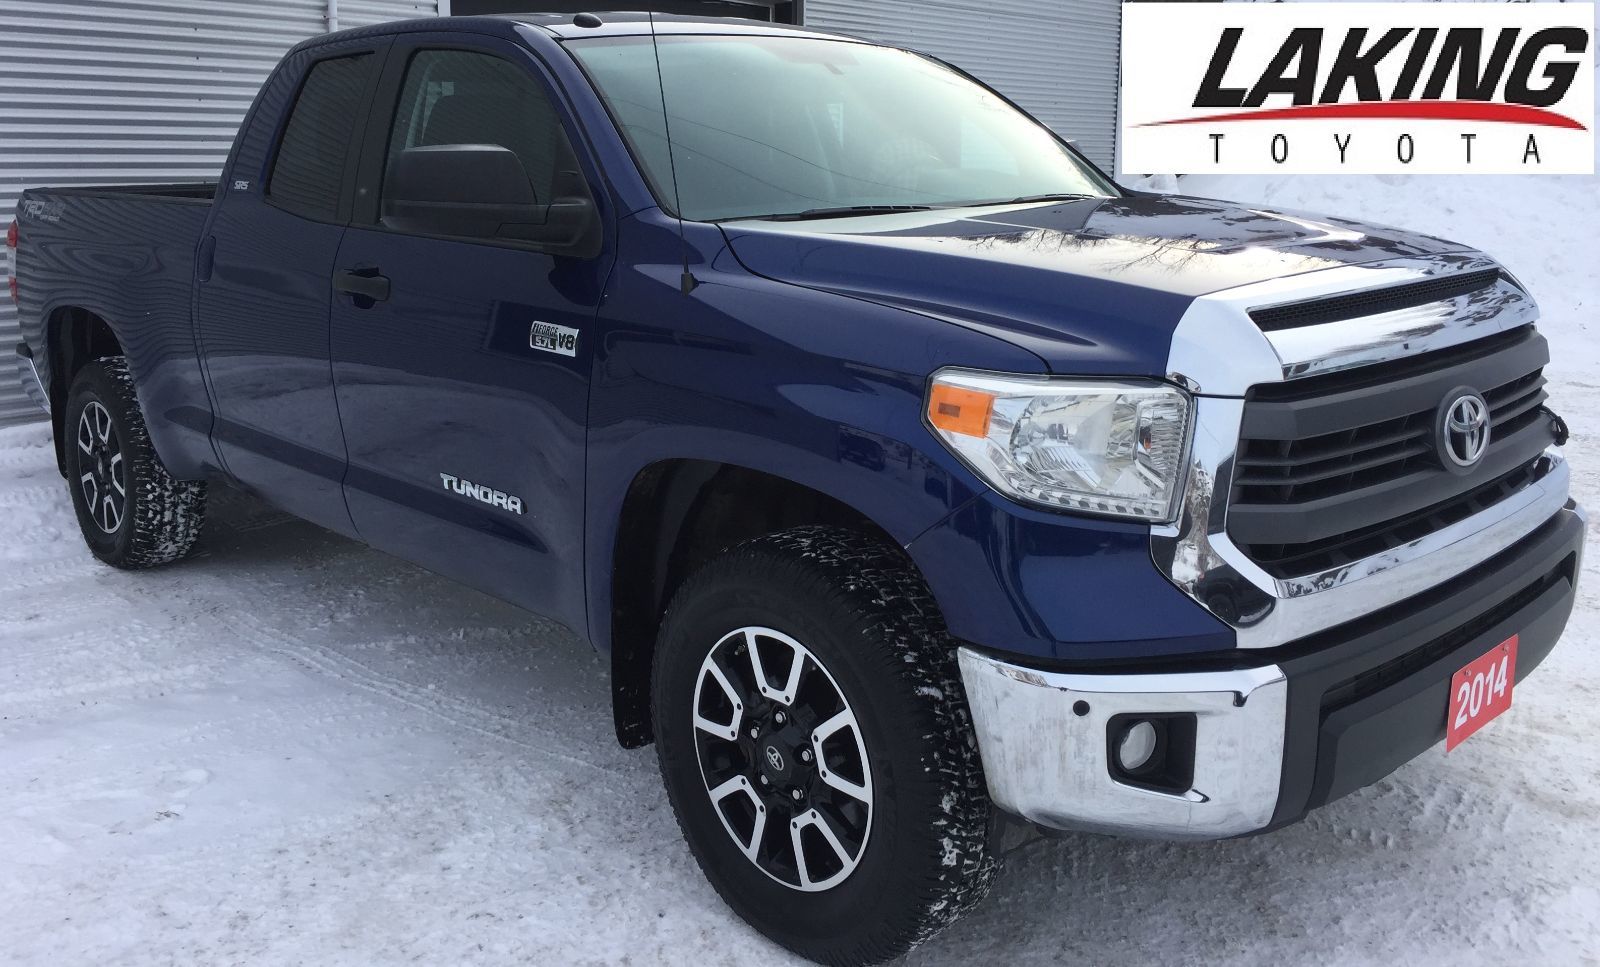 Used 2014 Toyota Tundra SR5 4X4 TRD OFF ROAD DOUBLE CAB "CLEAN" in